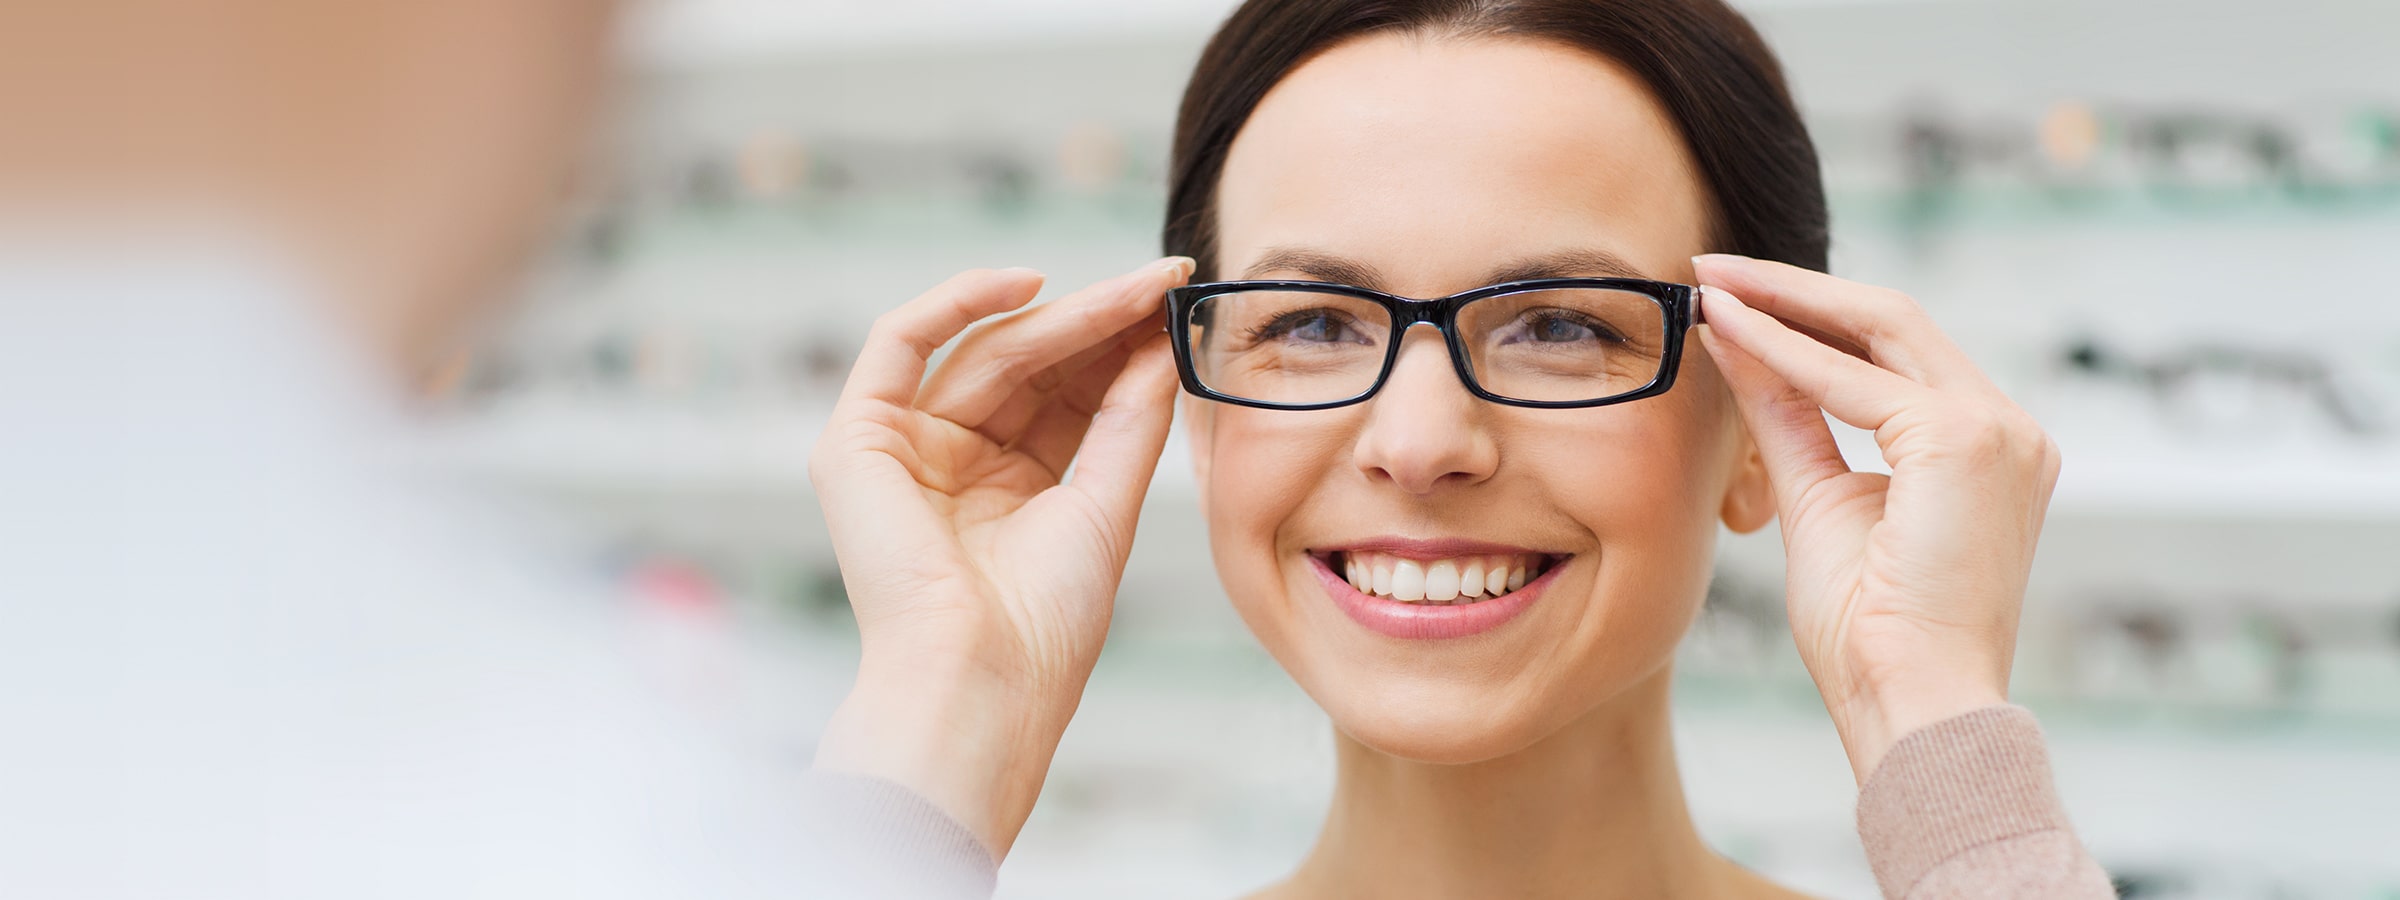 Woman putting on a pair of glasses